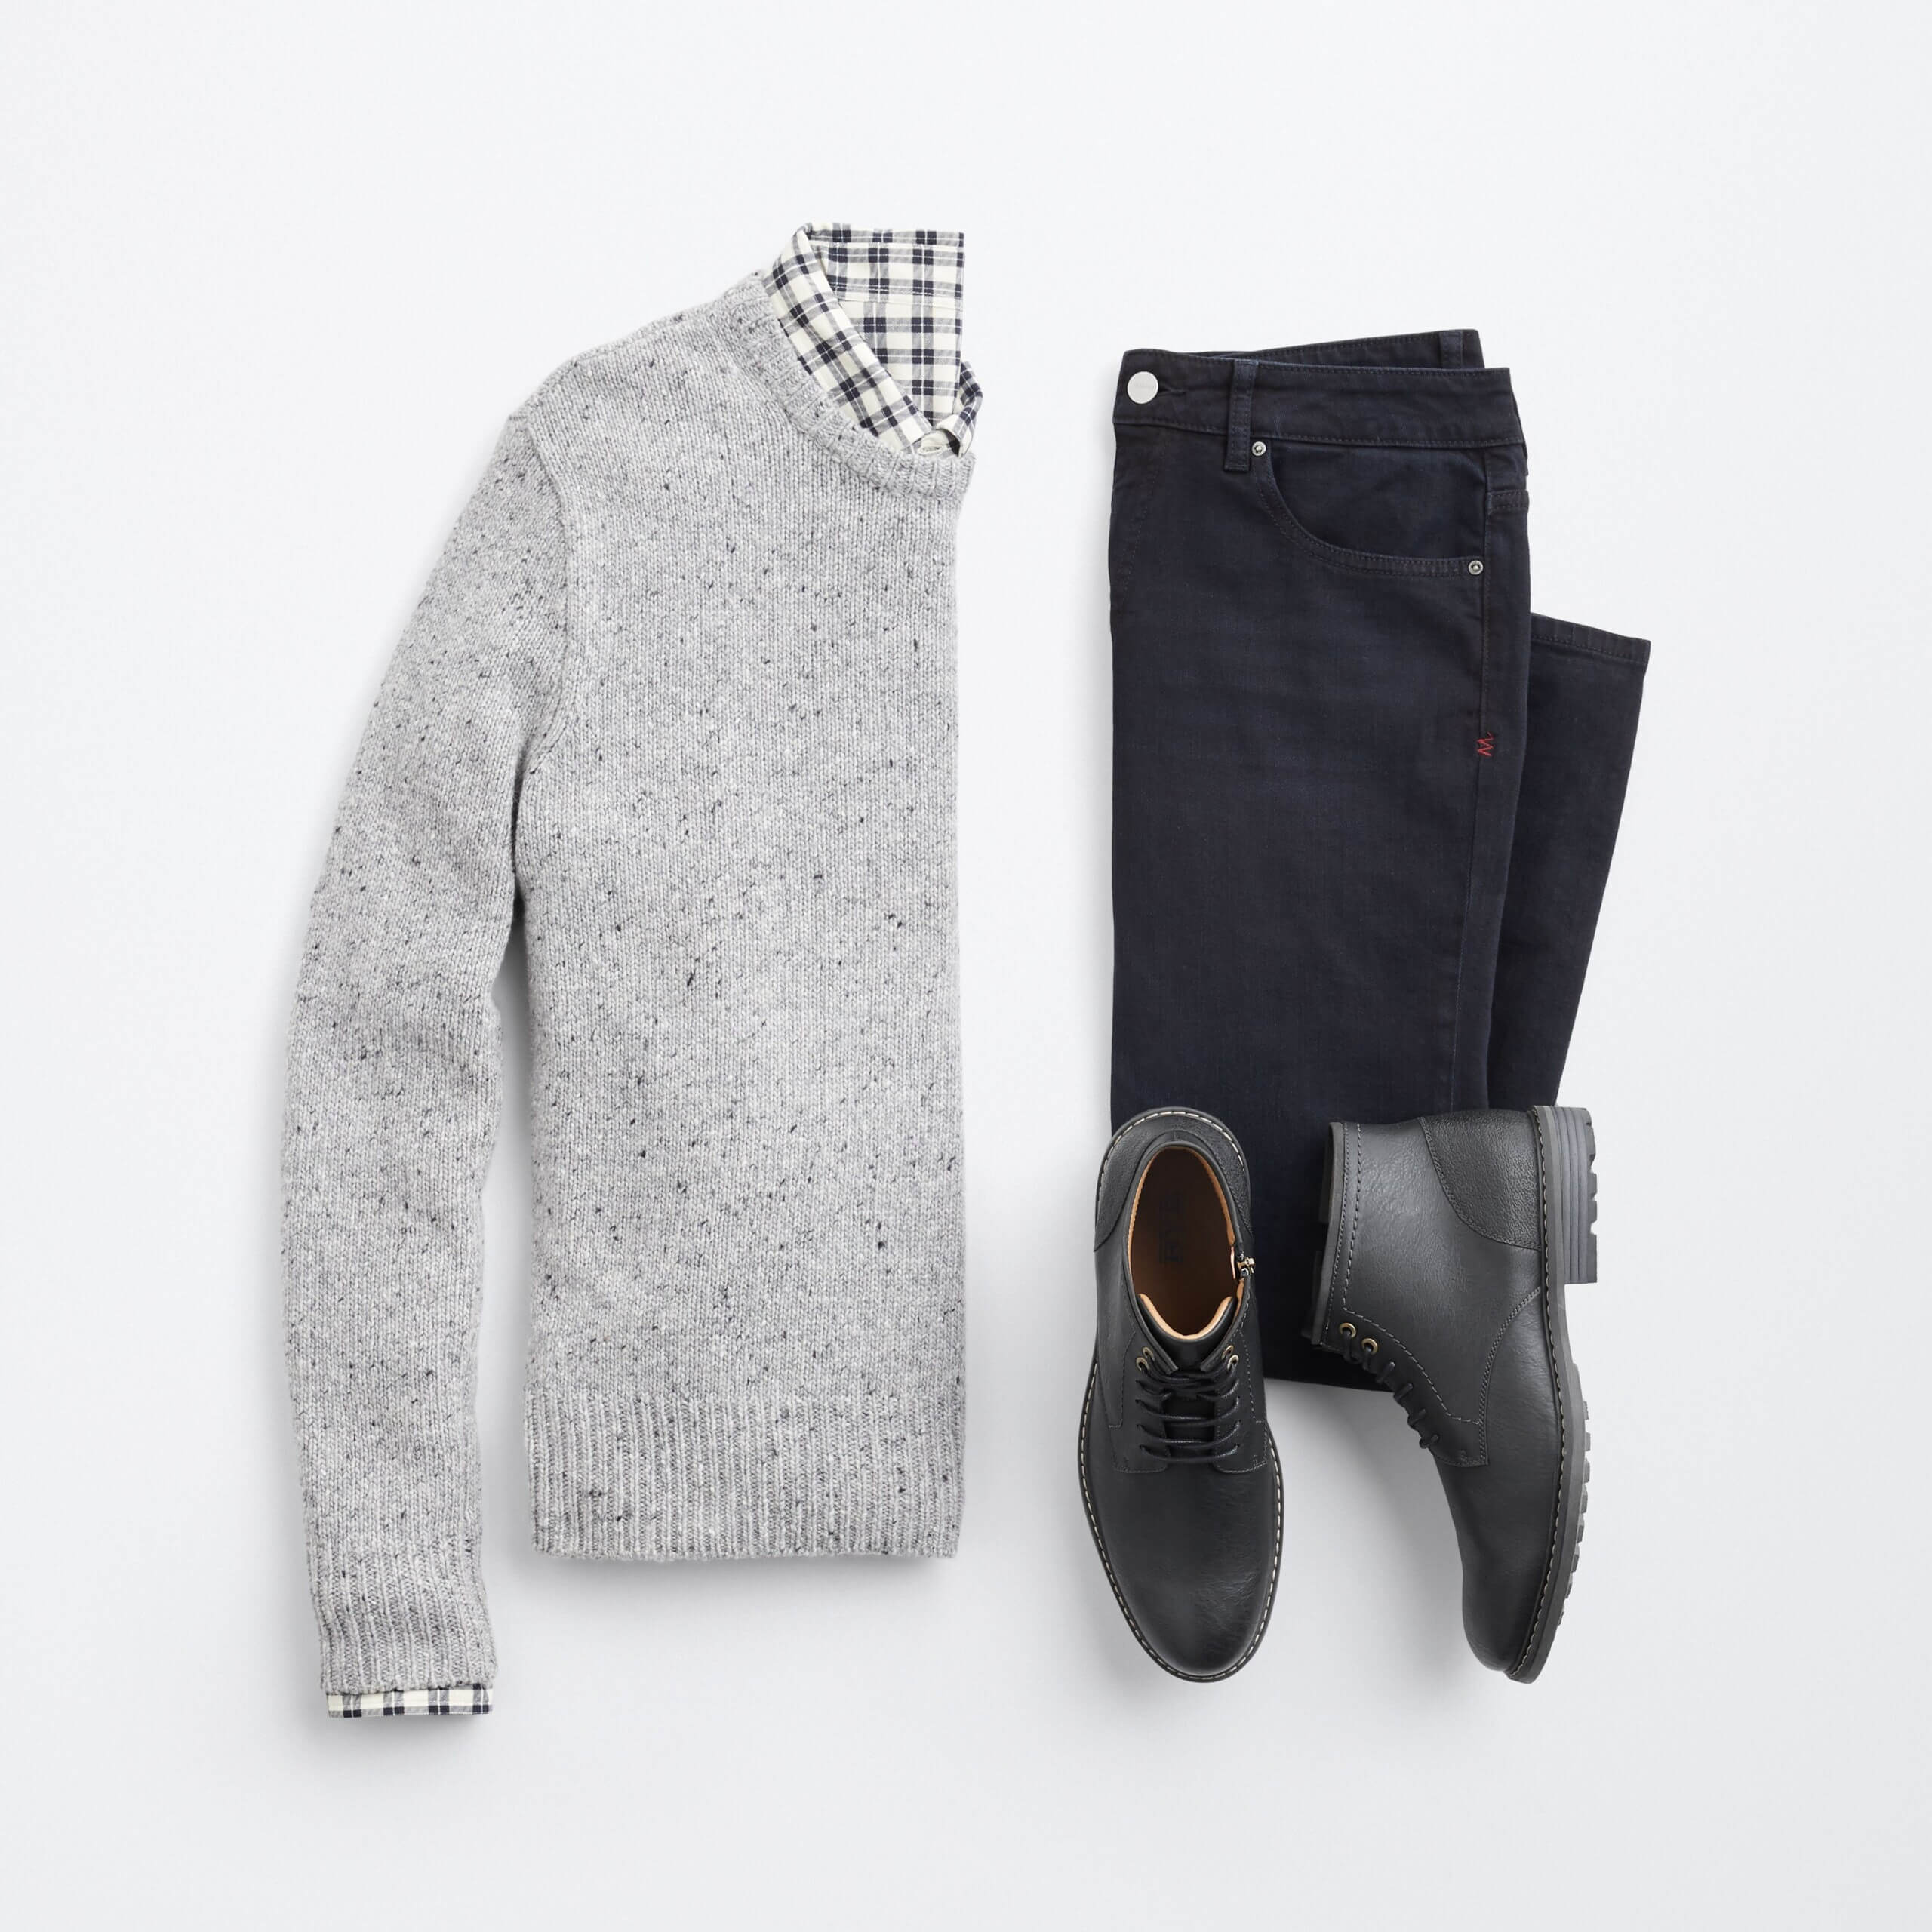 Stitch Fix men’s outfit with grey pullover sweater over black and white plaid shirt, black jeans and black boots.